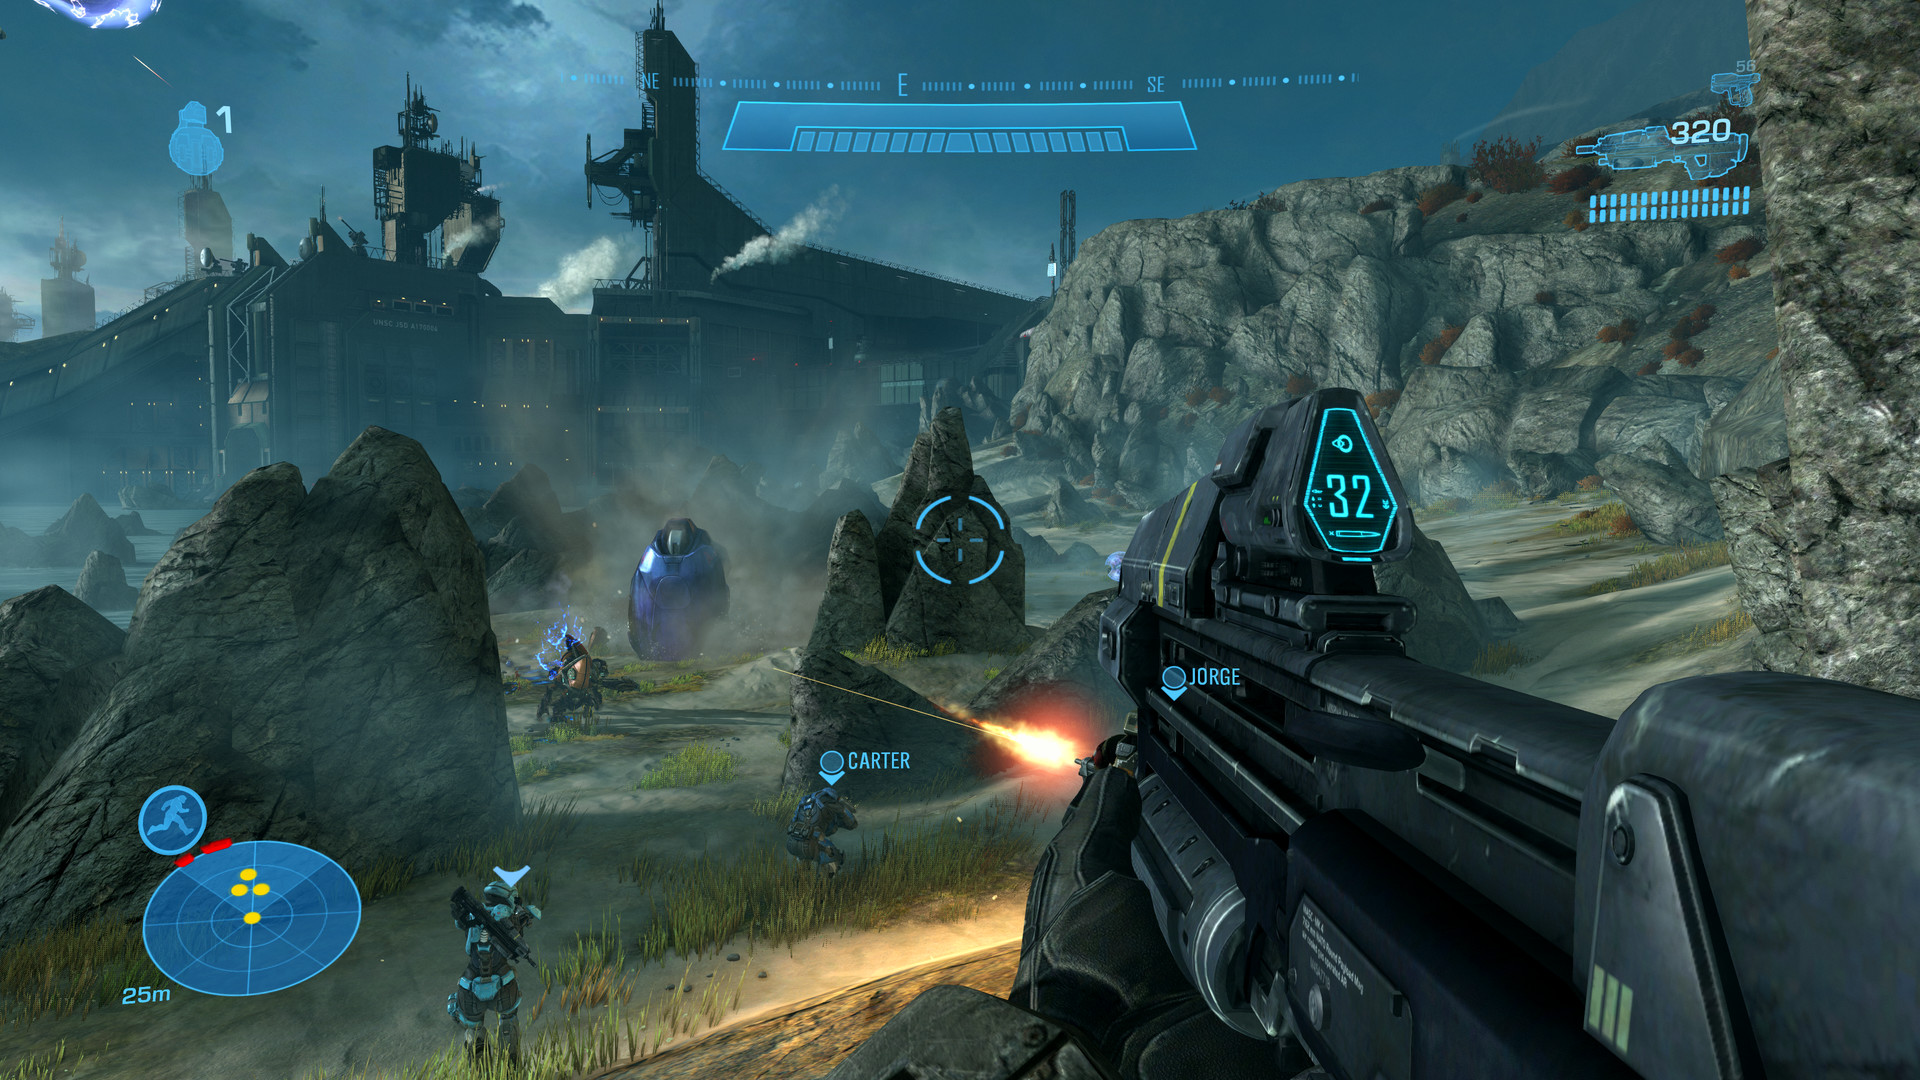 Halo The Master Chief Collection on Steam